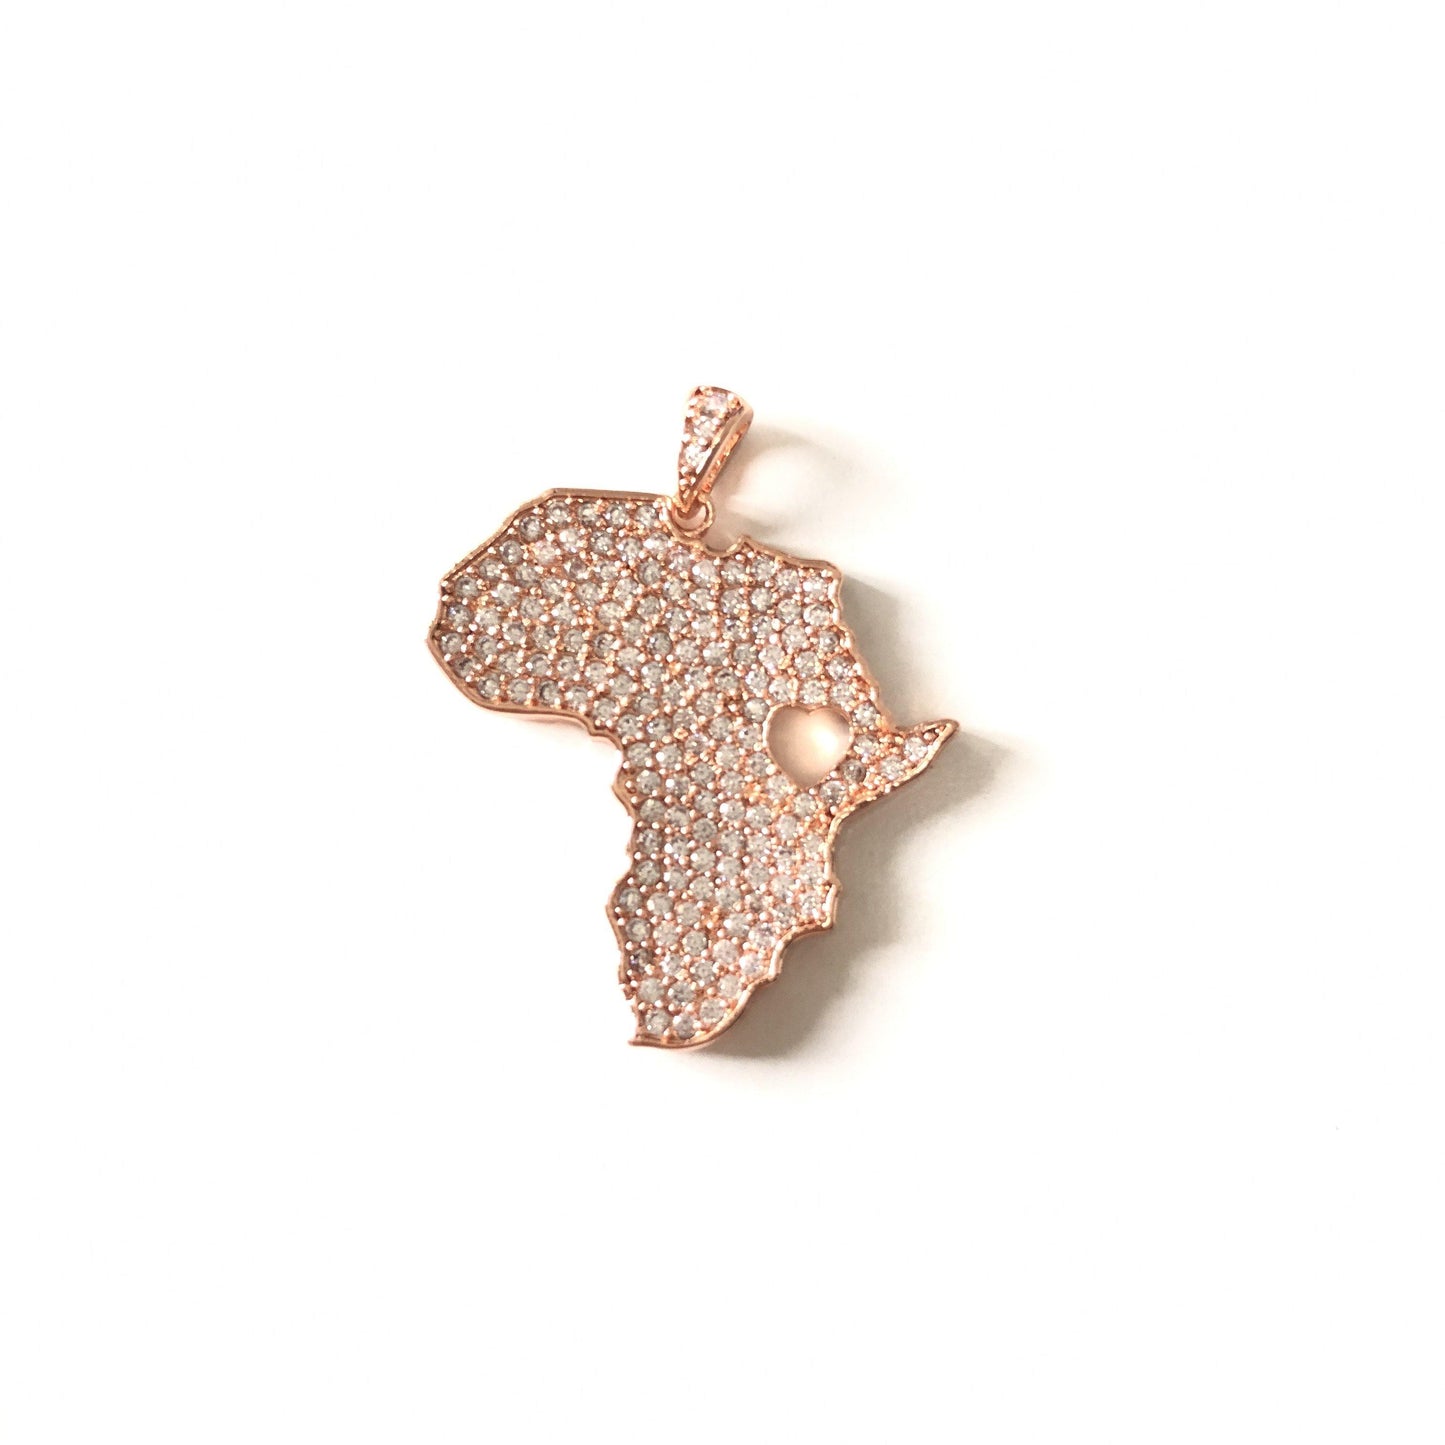 10pcs/lot 35*29mm CZ Paved Love Africa Charms Black History Month Juneteenth Awareness Rose Gold CZ Paved Charms Juneteenth & Black History Month Awareness Maps Charms Beads Beyond